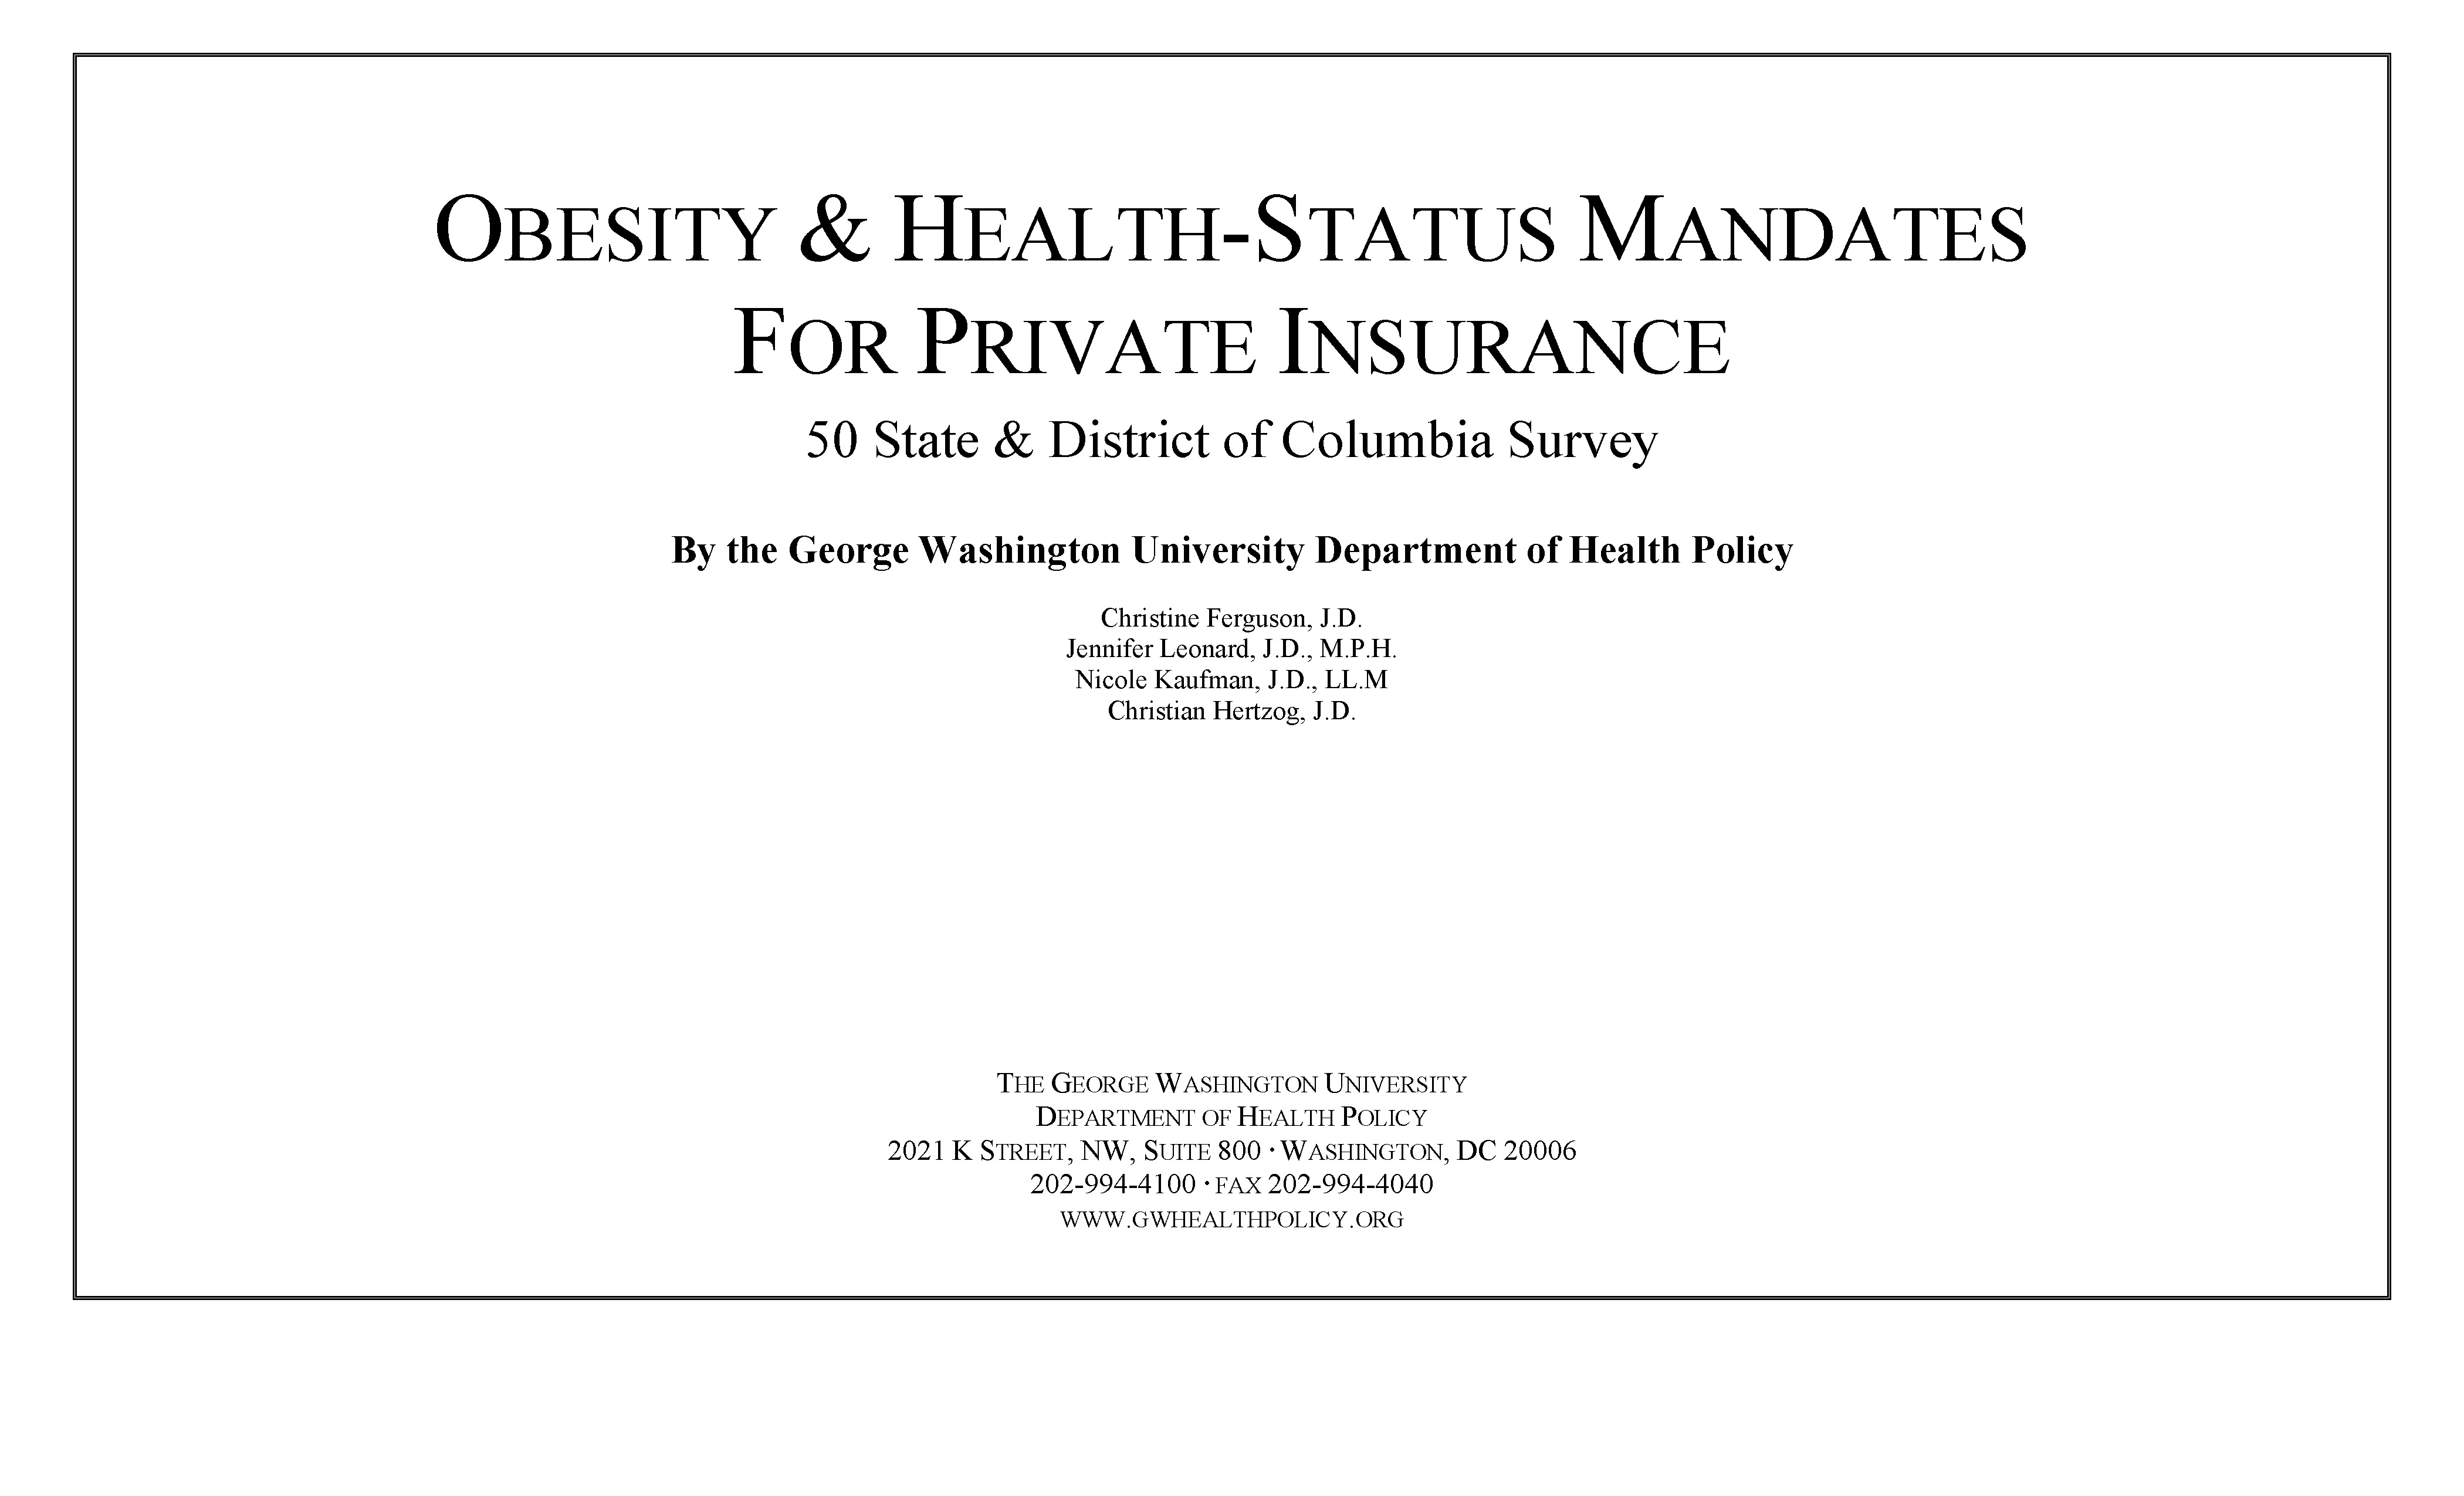 Survey of Obesity & Health-Status Mandates by state for Private Insurance (2010) cover